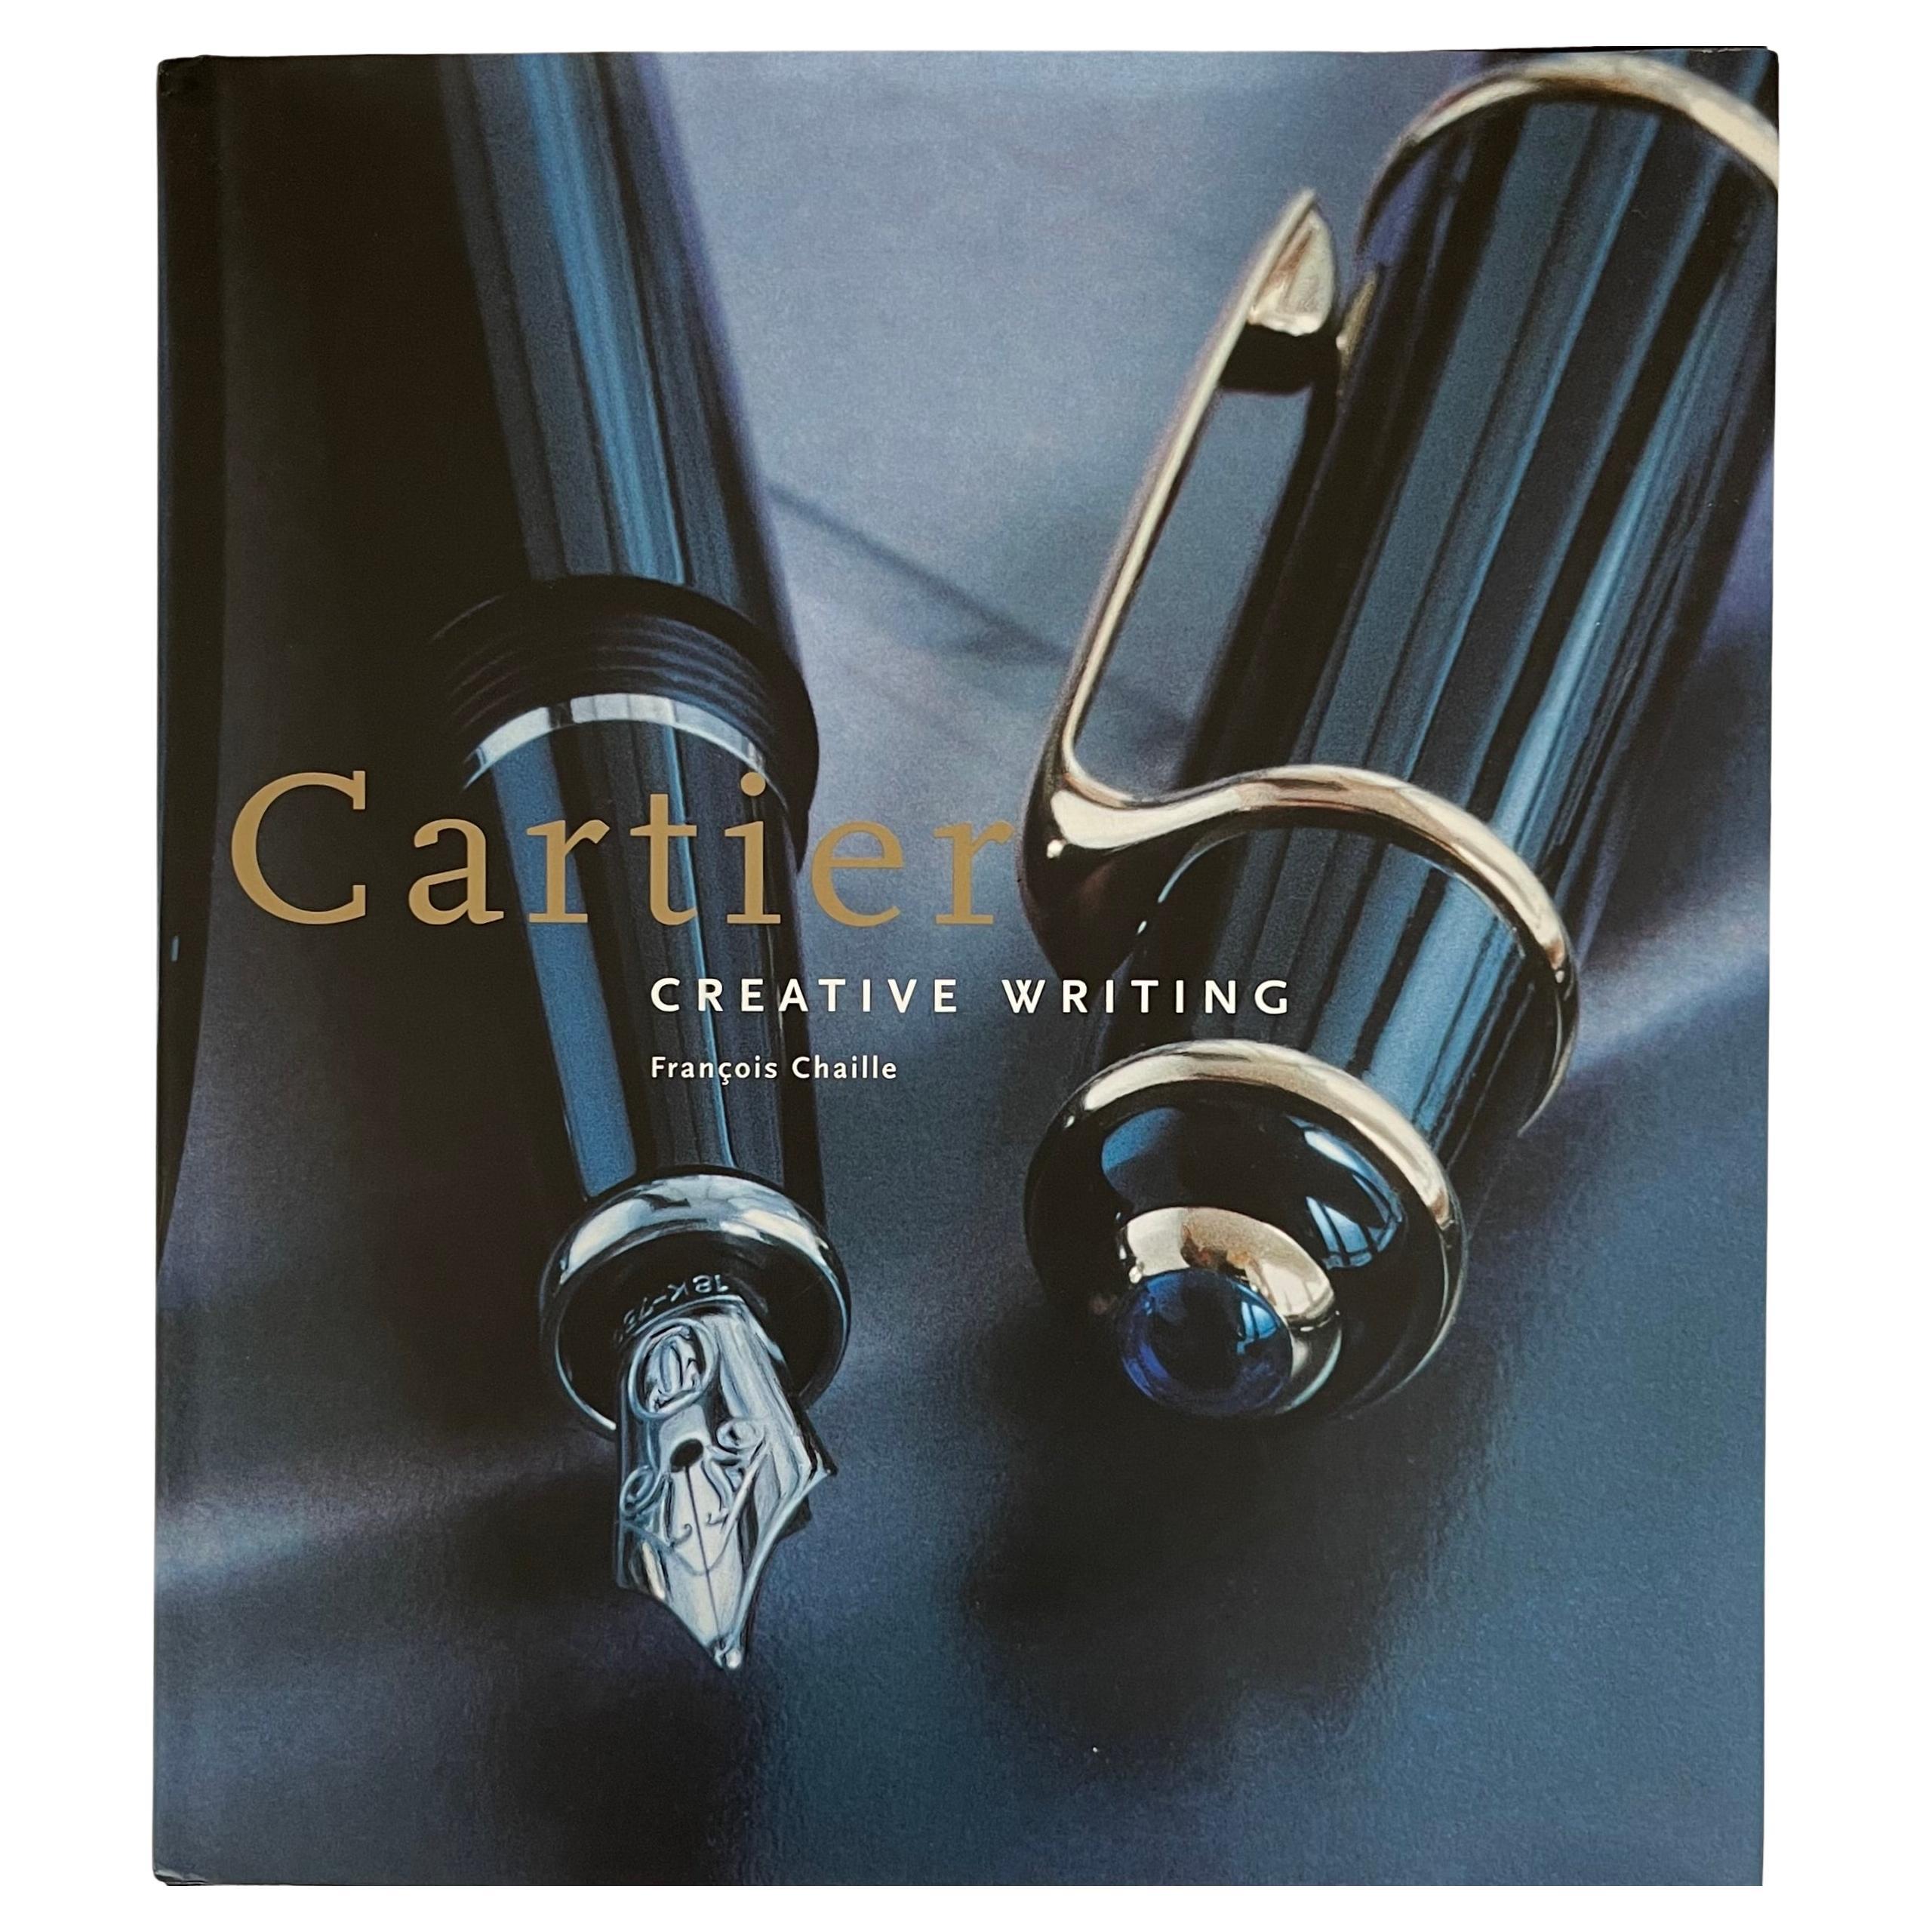 Cartier Creative Writing Francois Chaille 1st English Edition 2000 For Sale